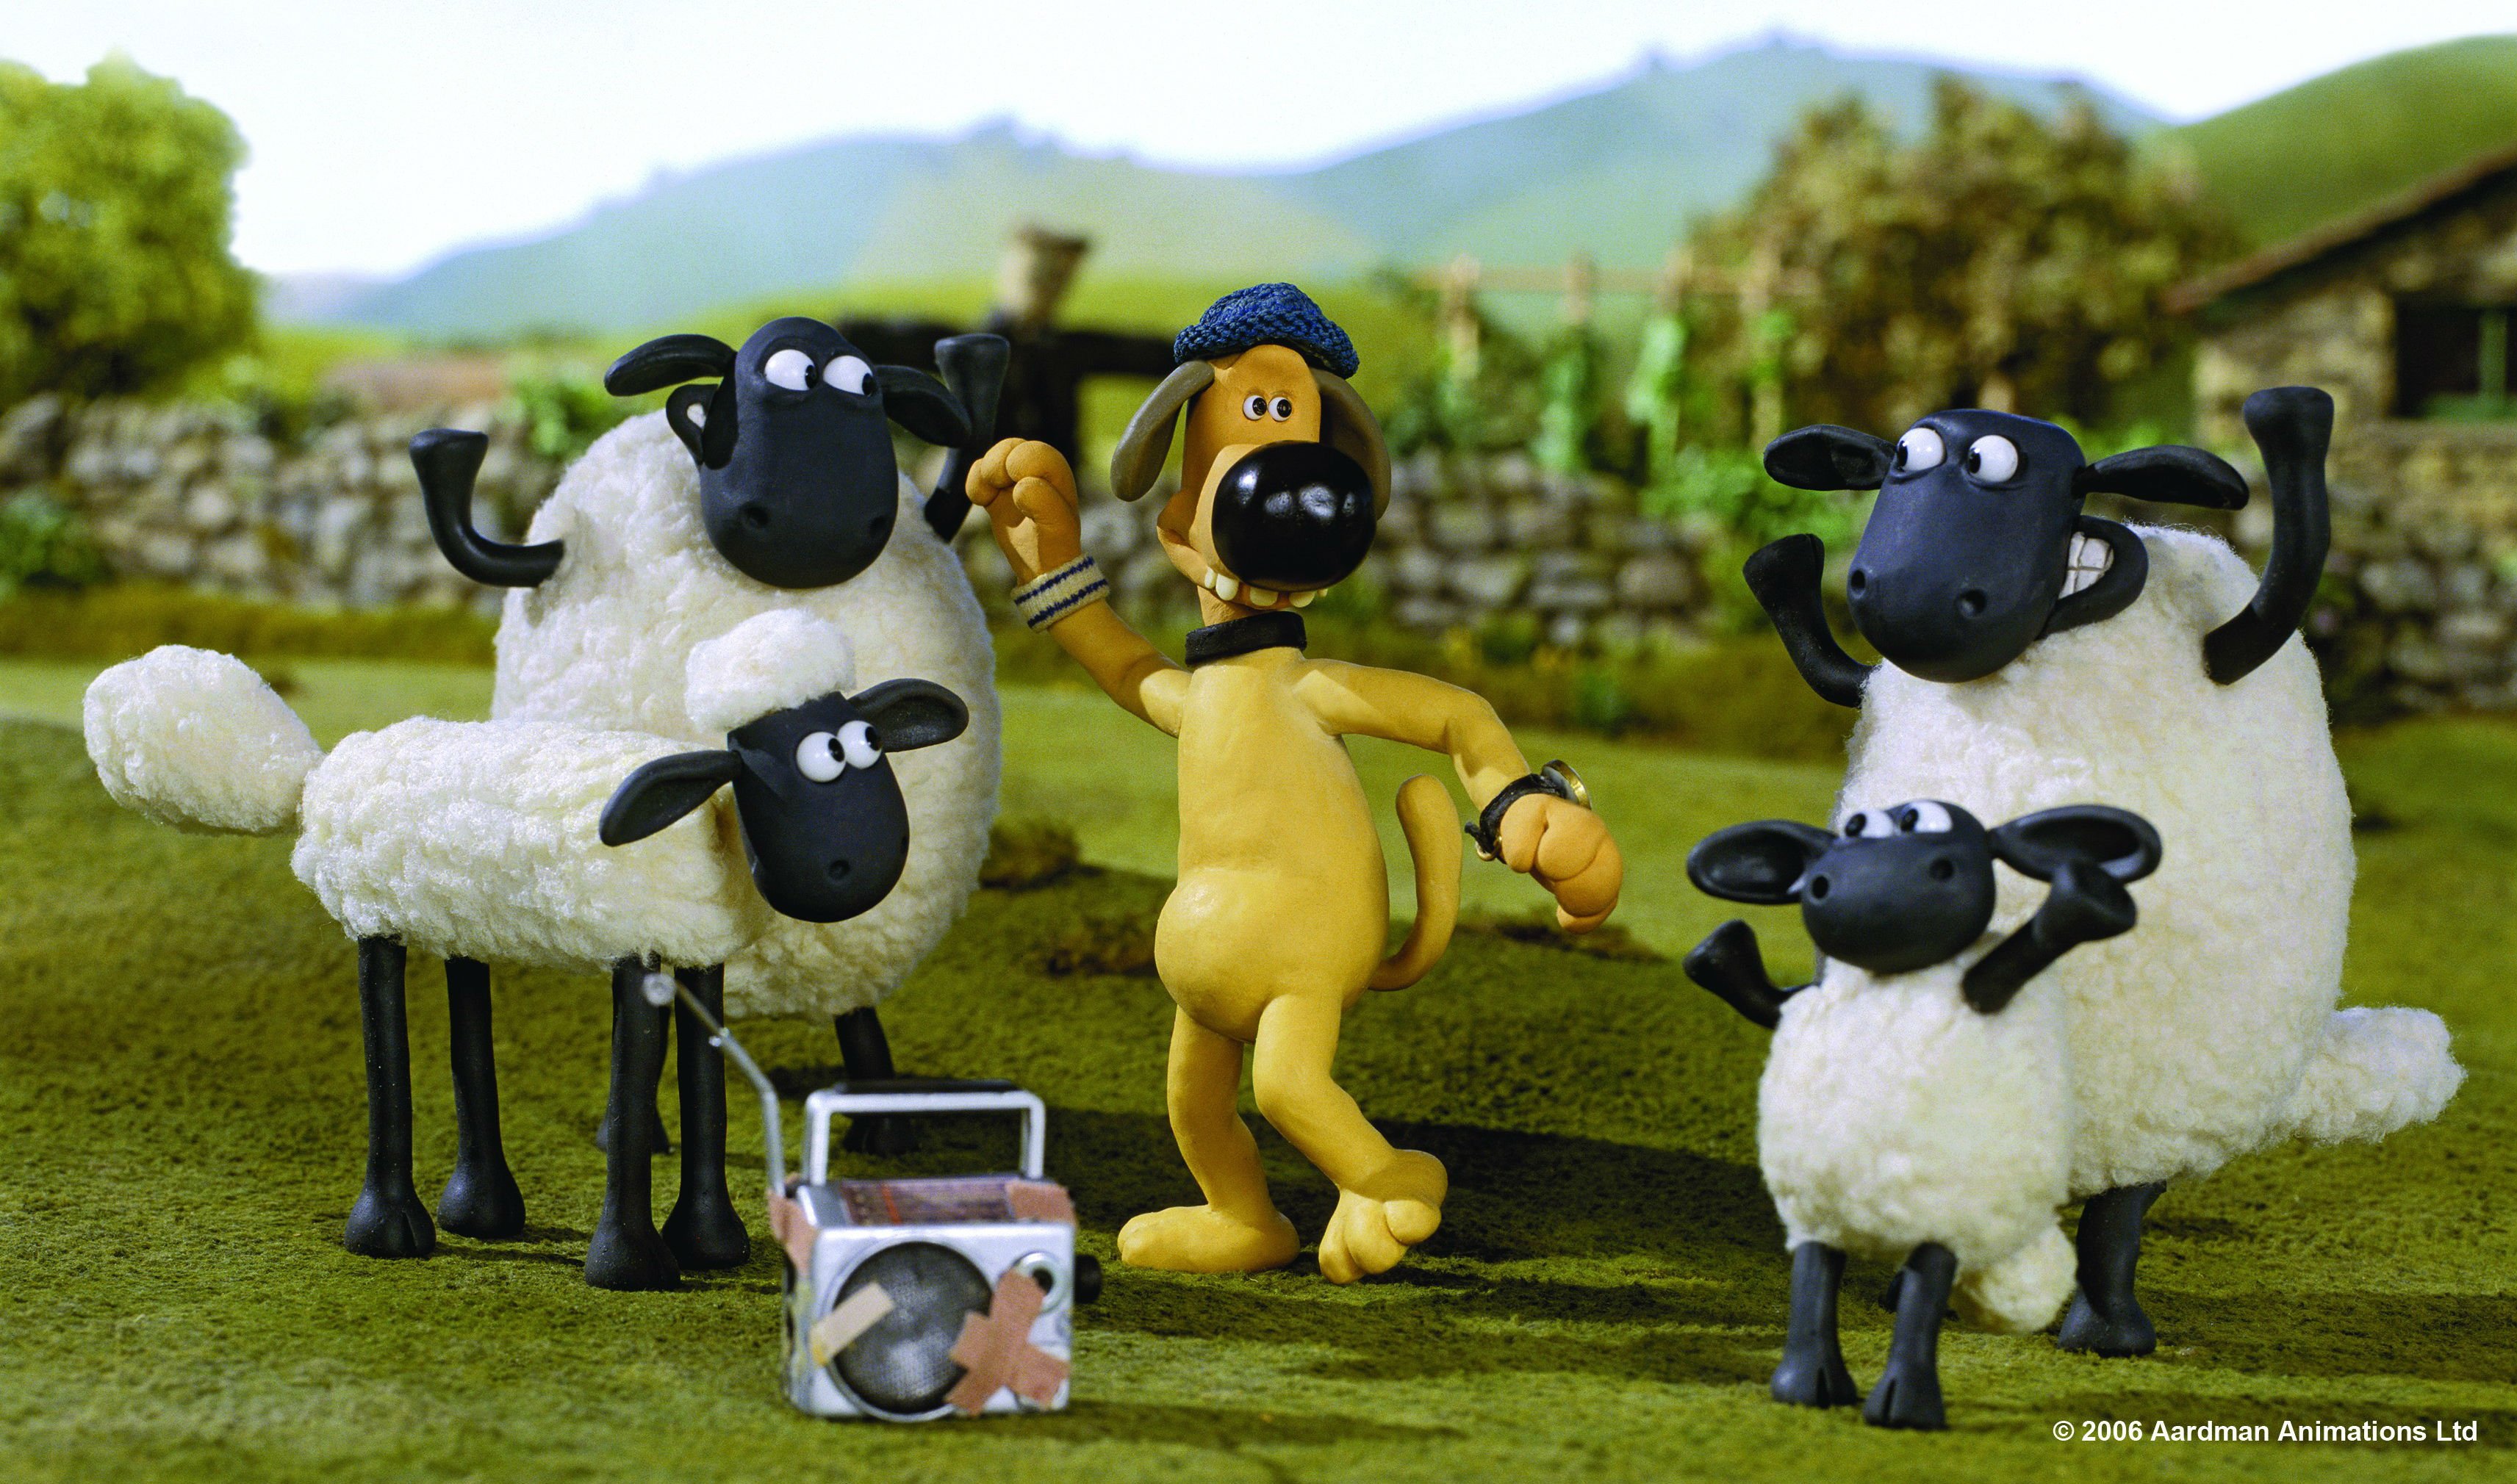 shaun the sheep, Animation, Family, Comedy, Shaun, Sheep, Adventure  Wallpapers HD / Desktop and Mobile Backgrounds